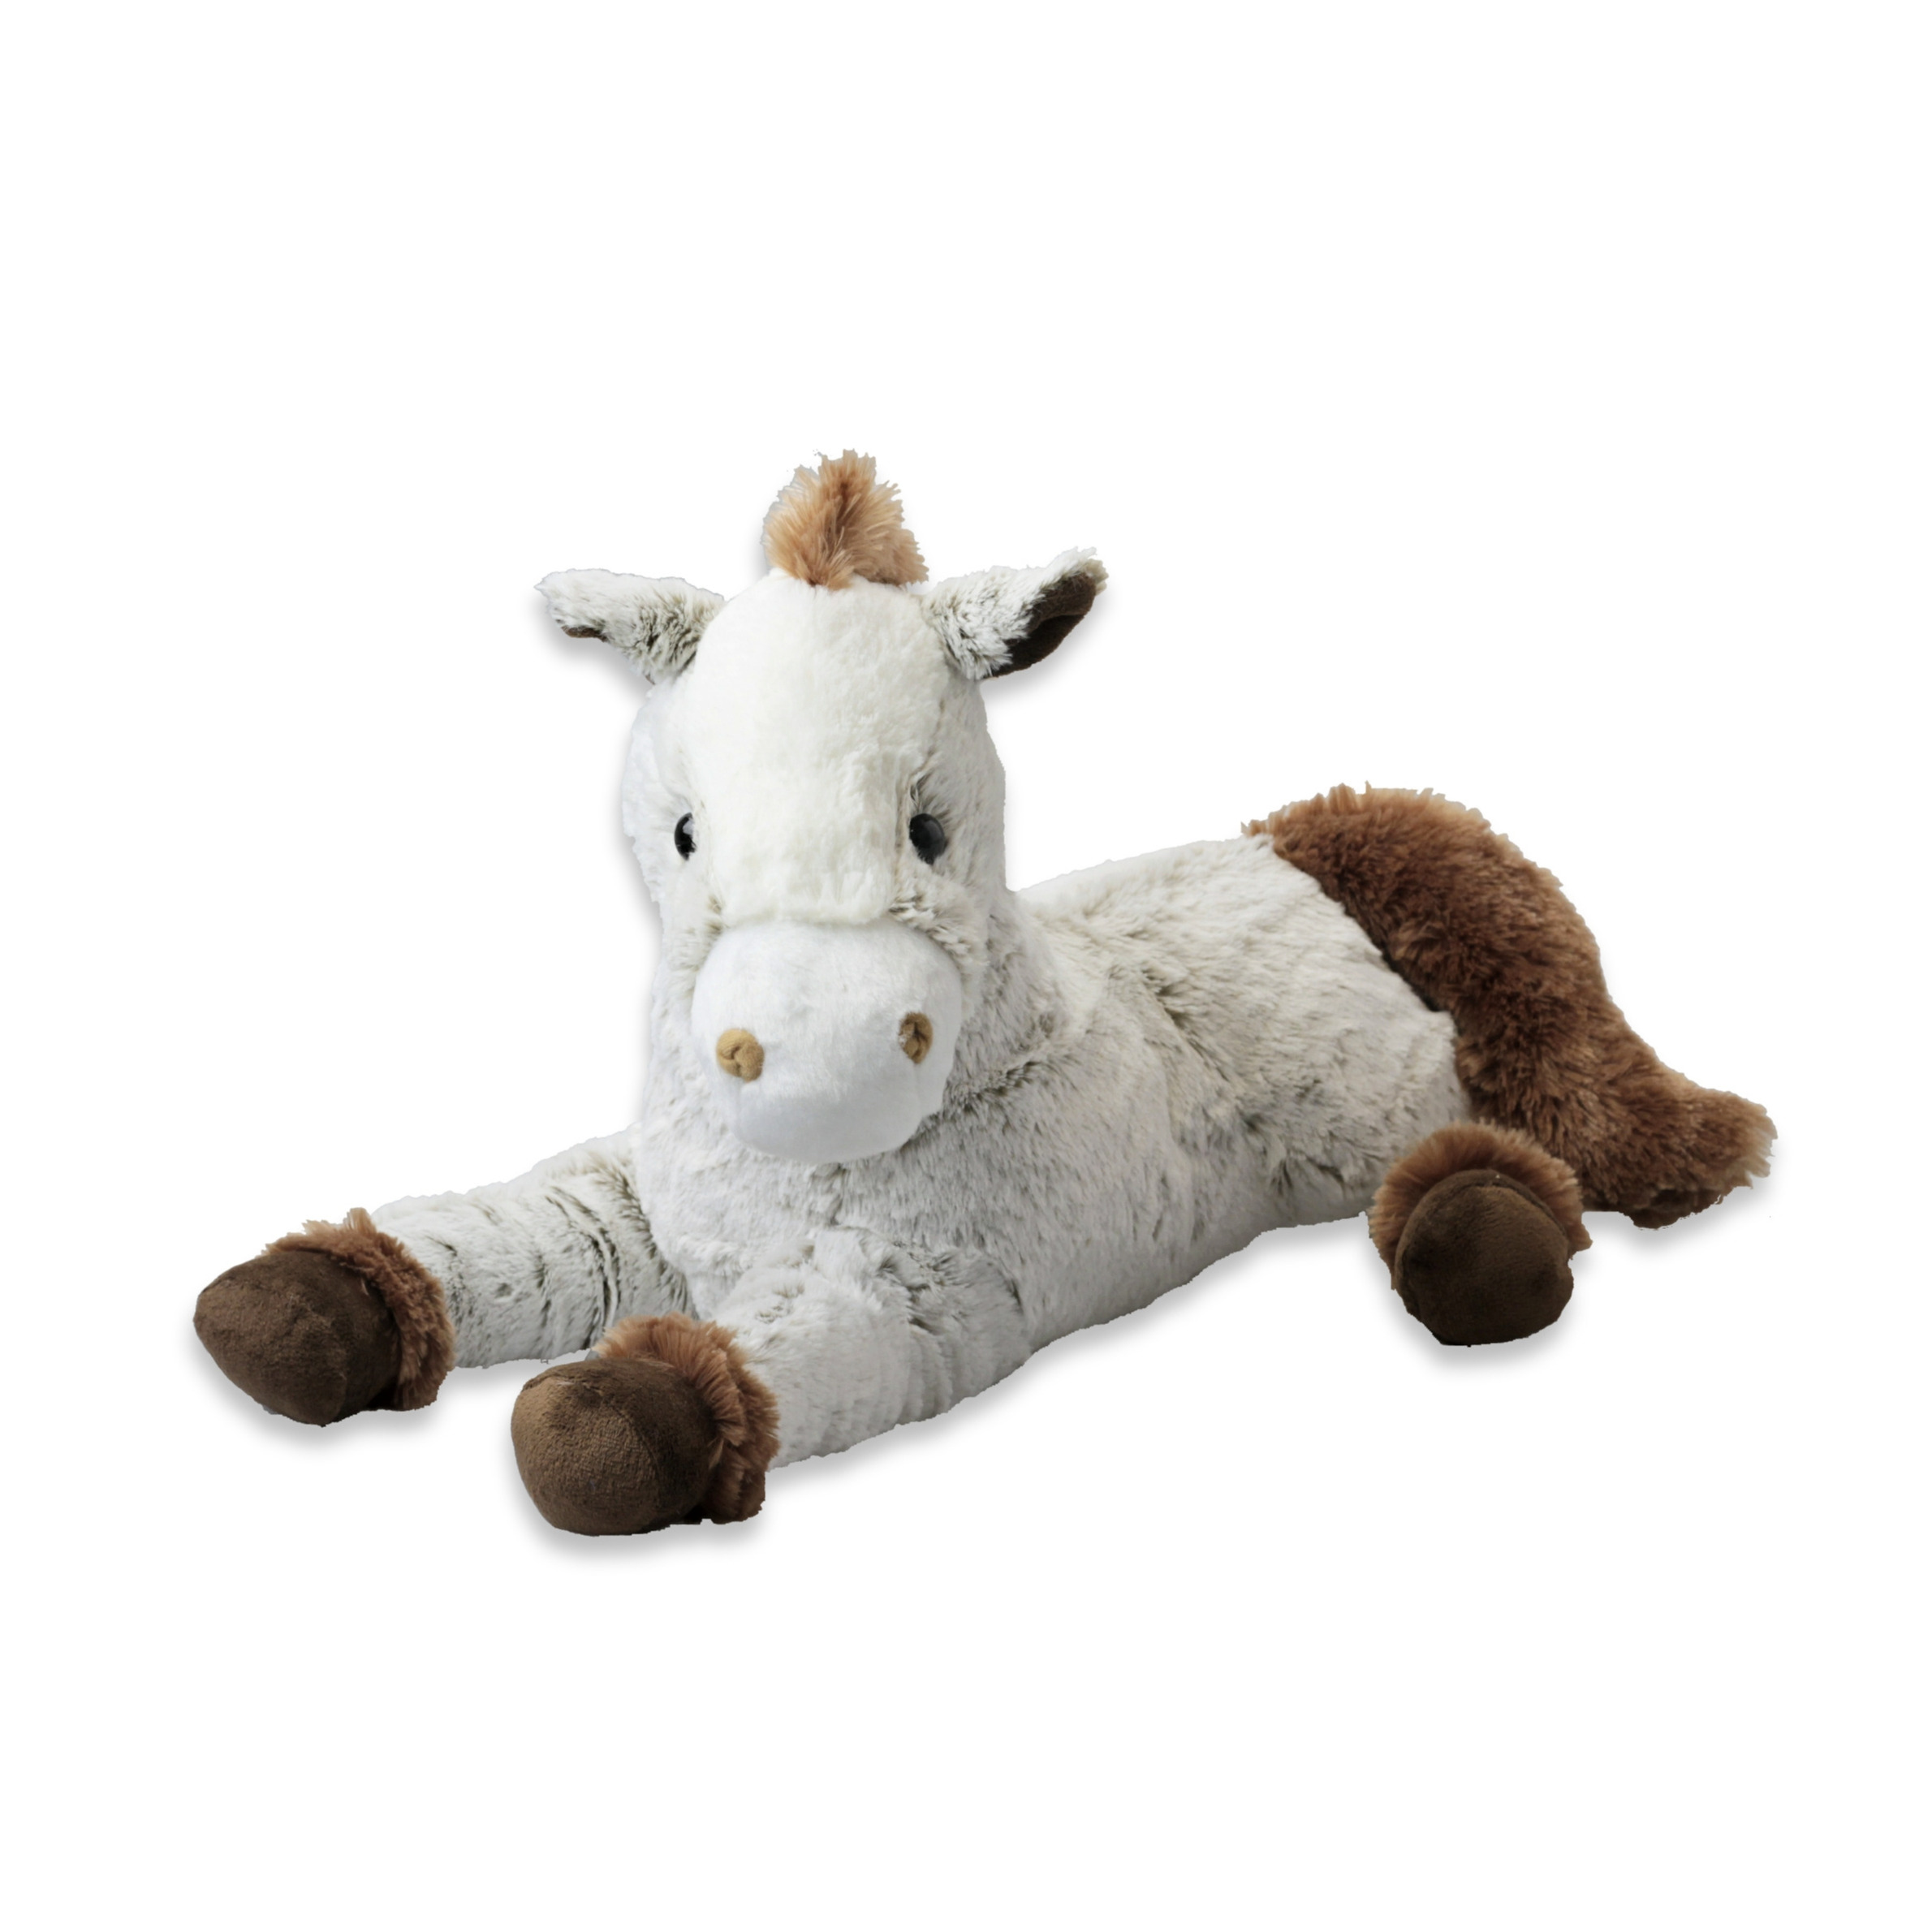 Inware Pluche paard knuffel - liggend - wit/bruin - polyester - 45 cm